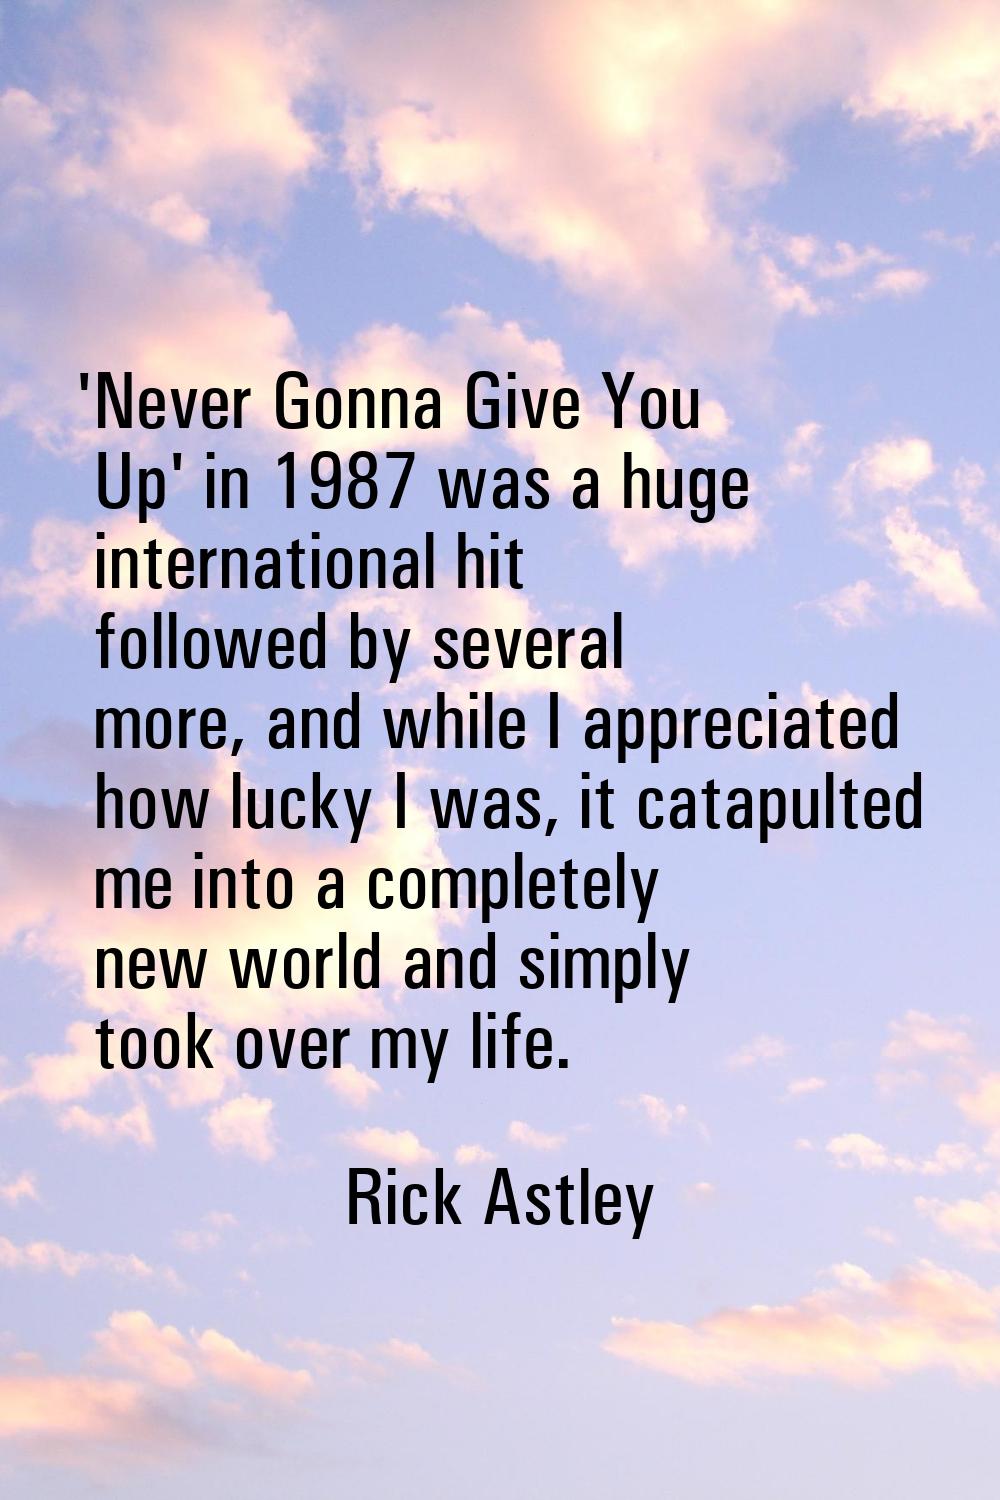 'Never Gonna Give You Up' in 1987 was a huge international hit followed by several more, and while 